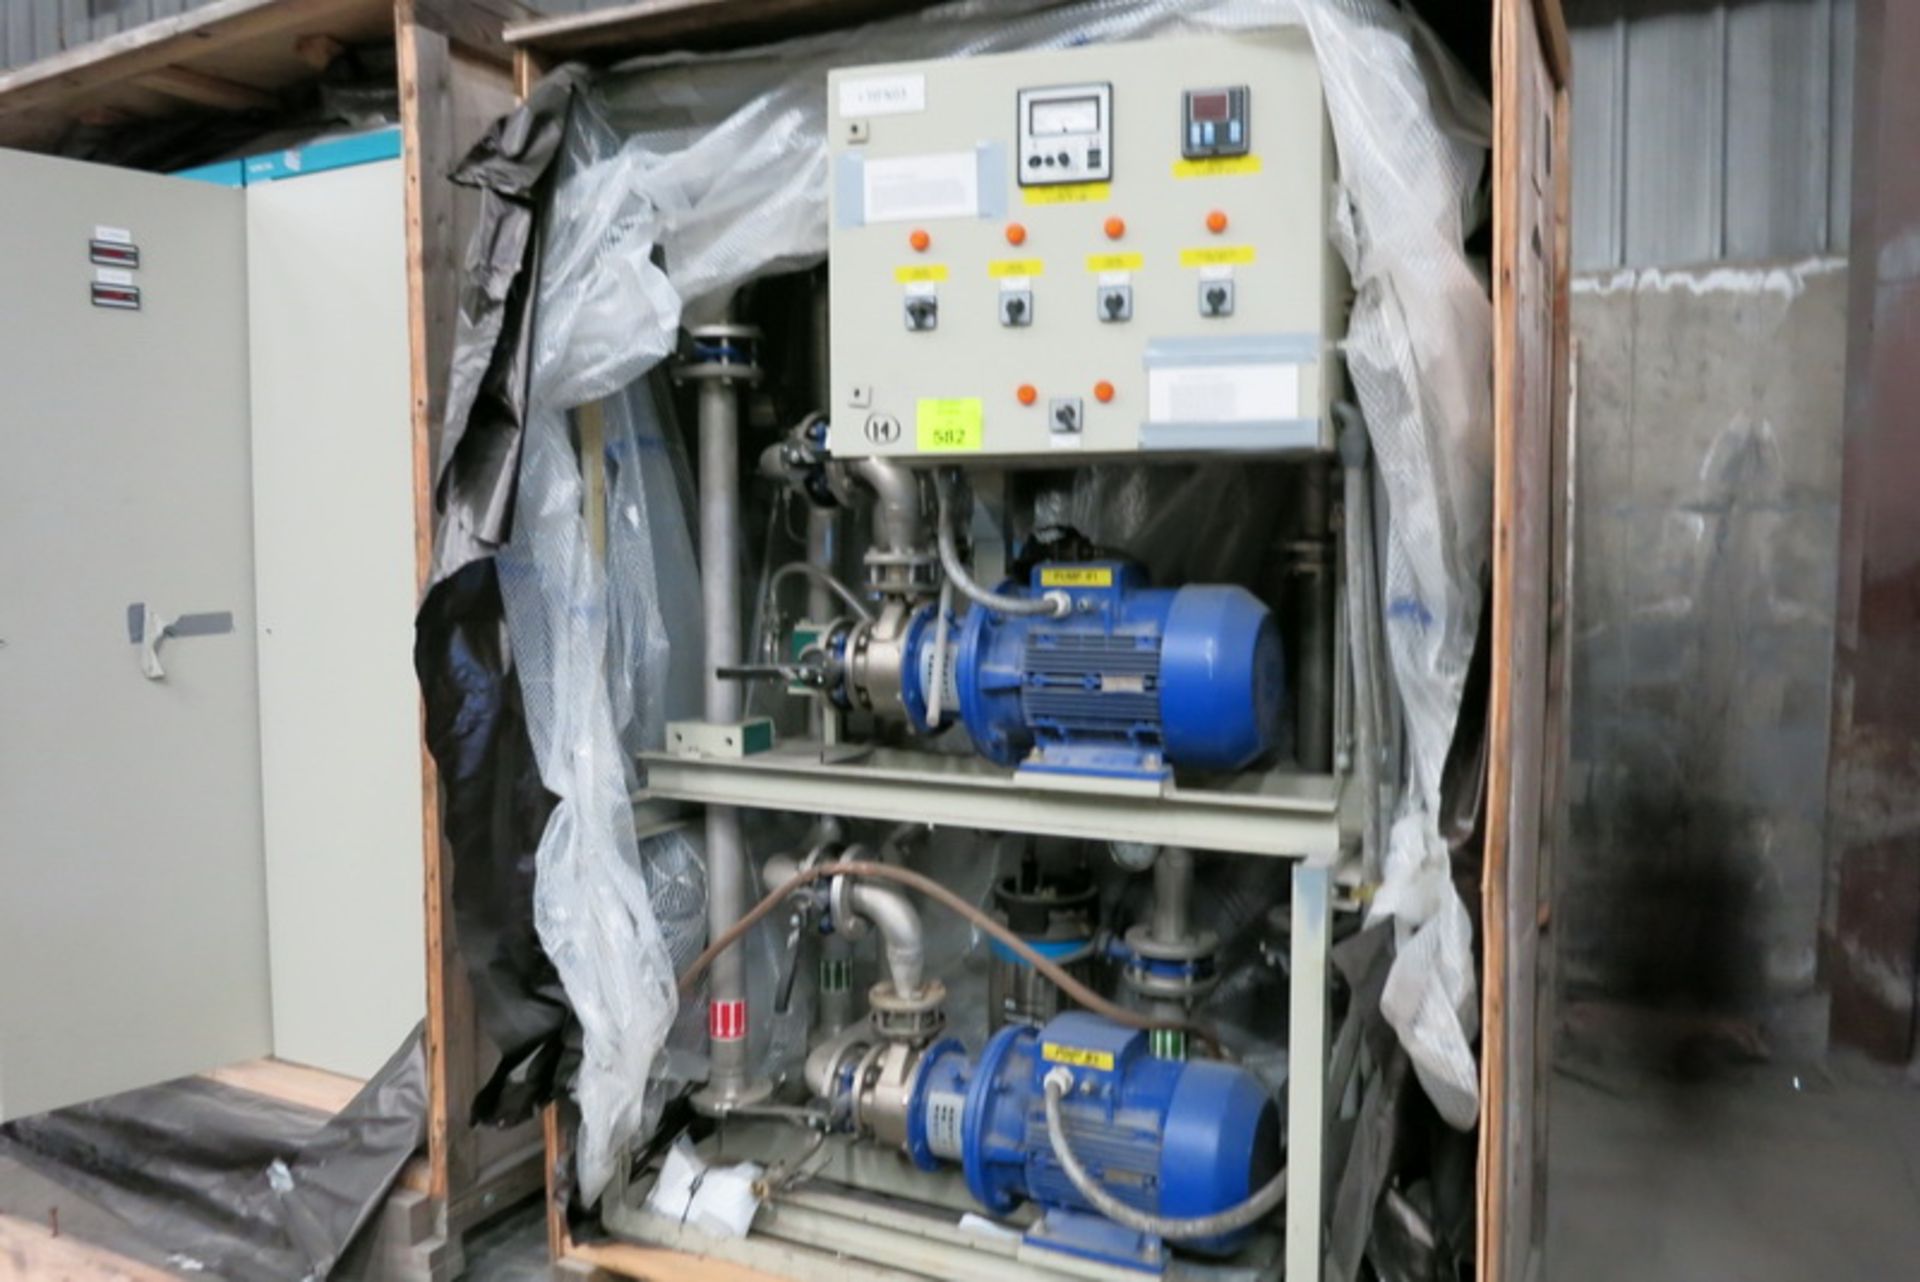 [Lot] Siemens water cooling / filtering system, model ZBW9370-9HPA6-Z, with (2) KSB-40-160/112